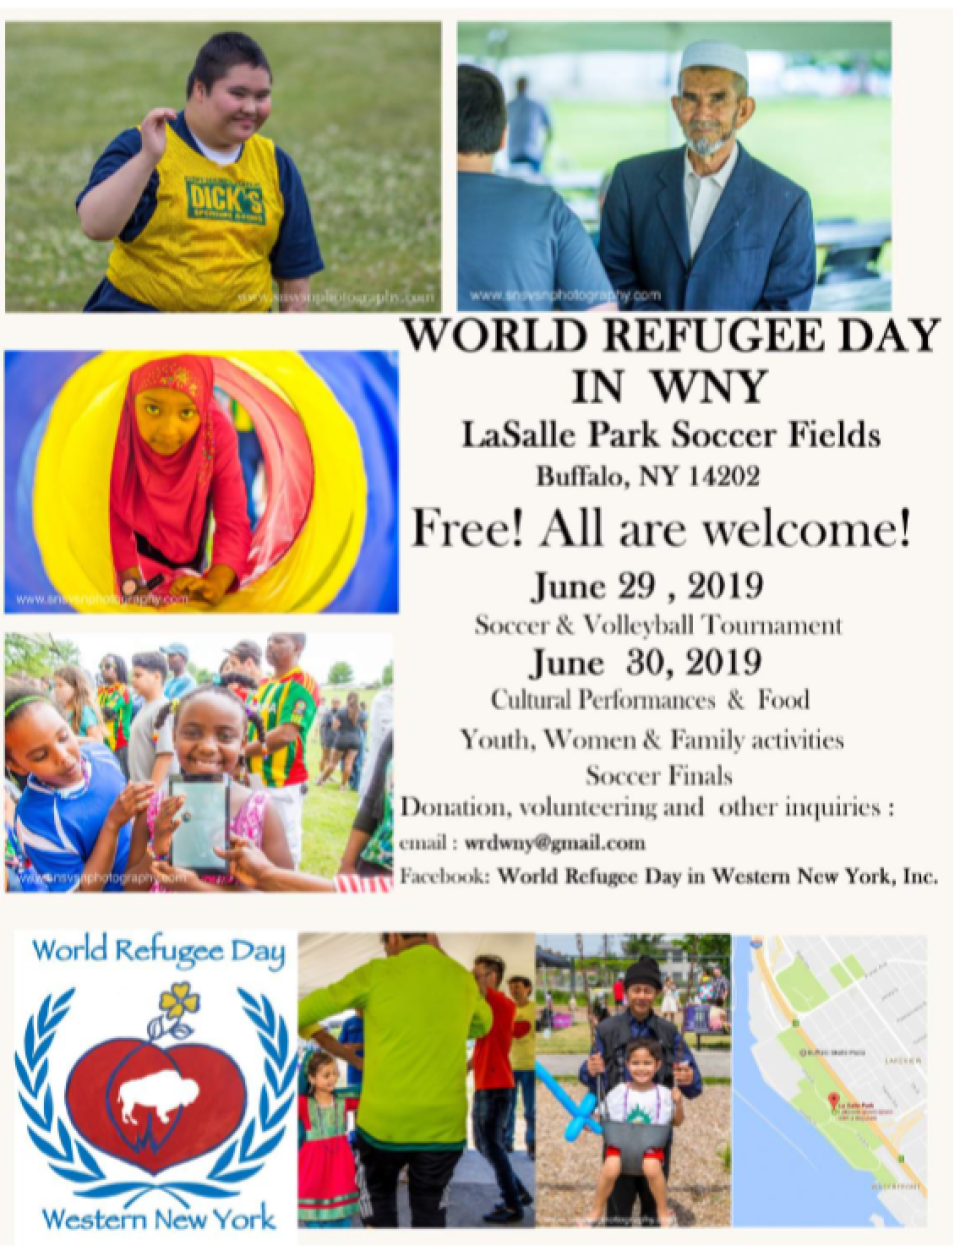 10th Annual World Refugee Day